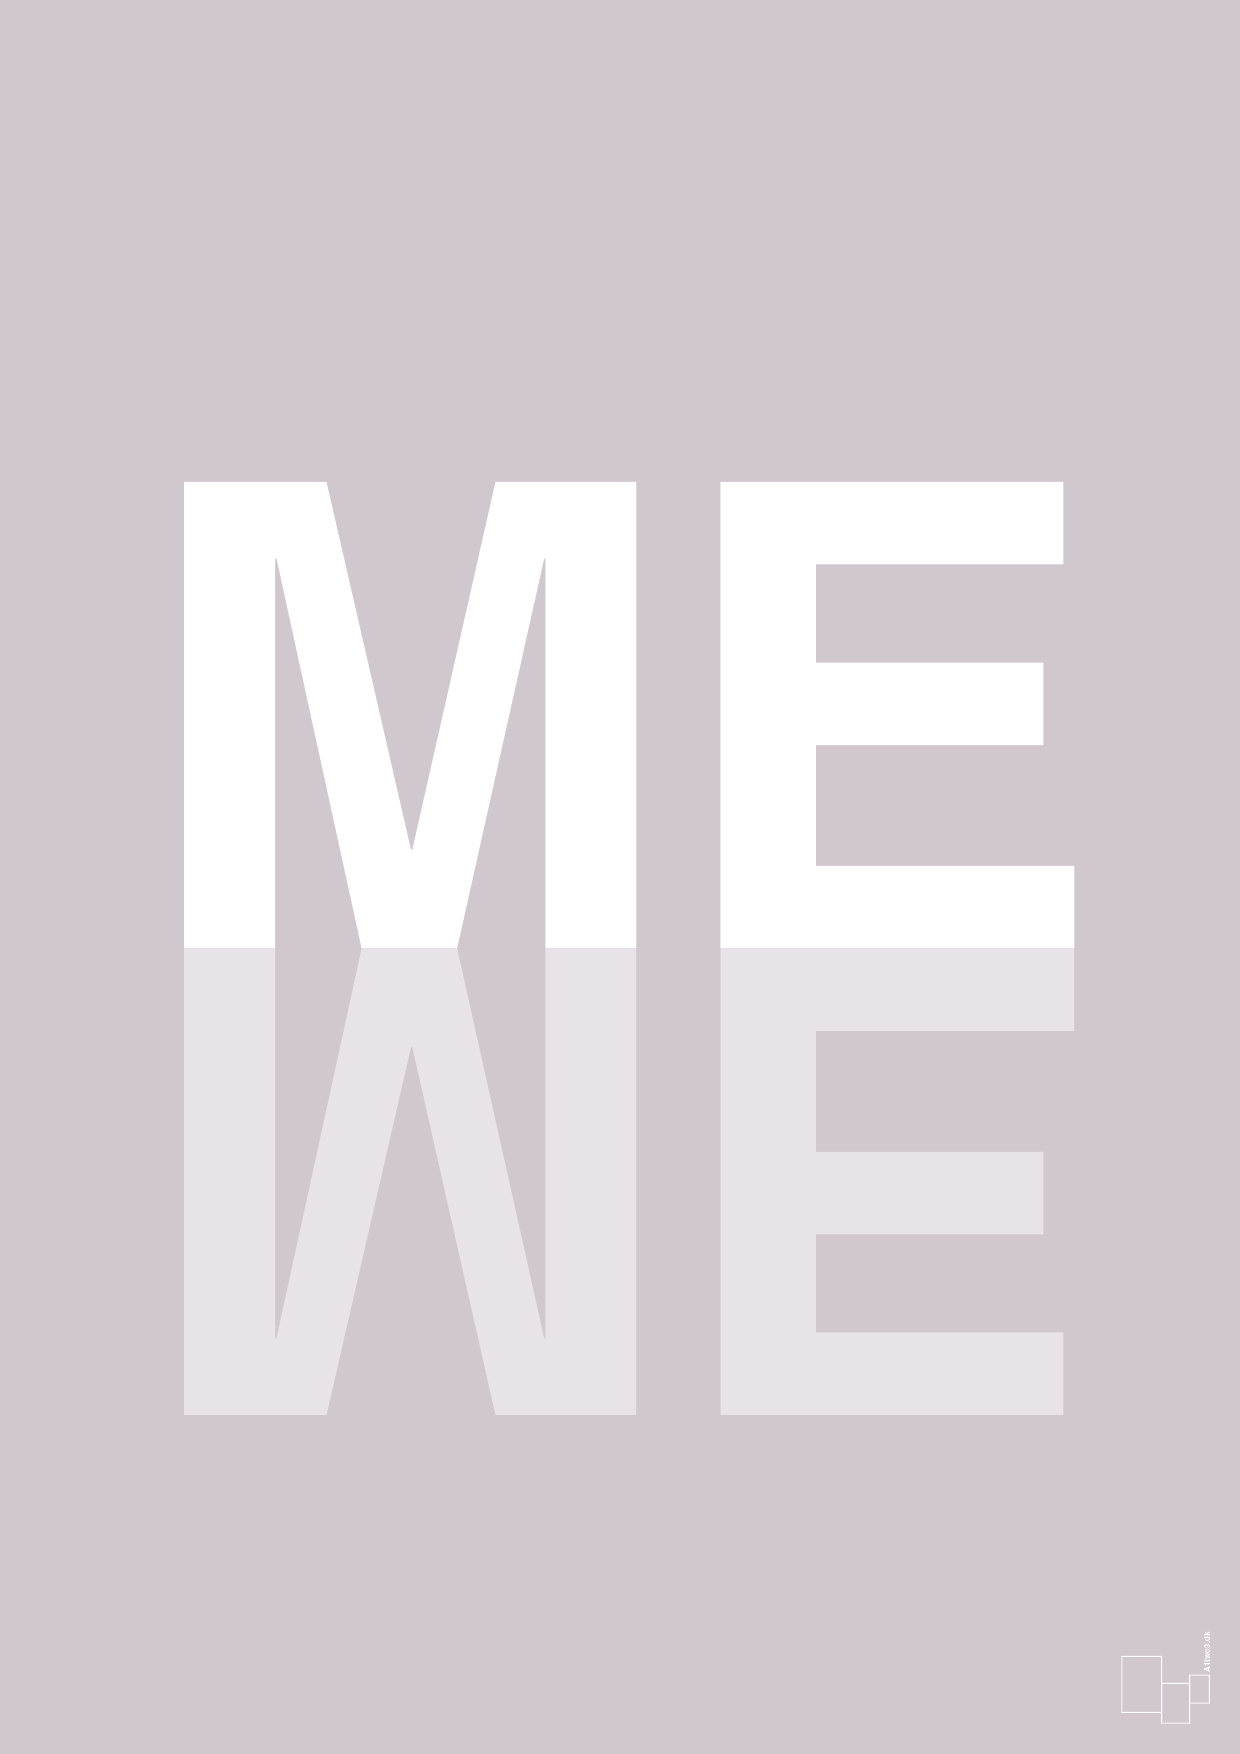 me we - Plakat med Ord i Dusty Lilac